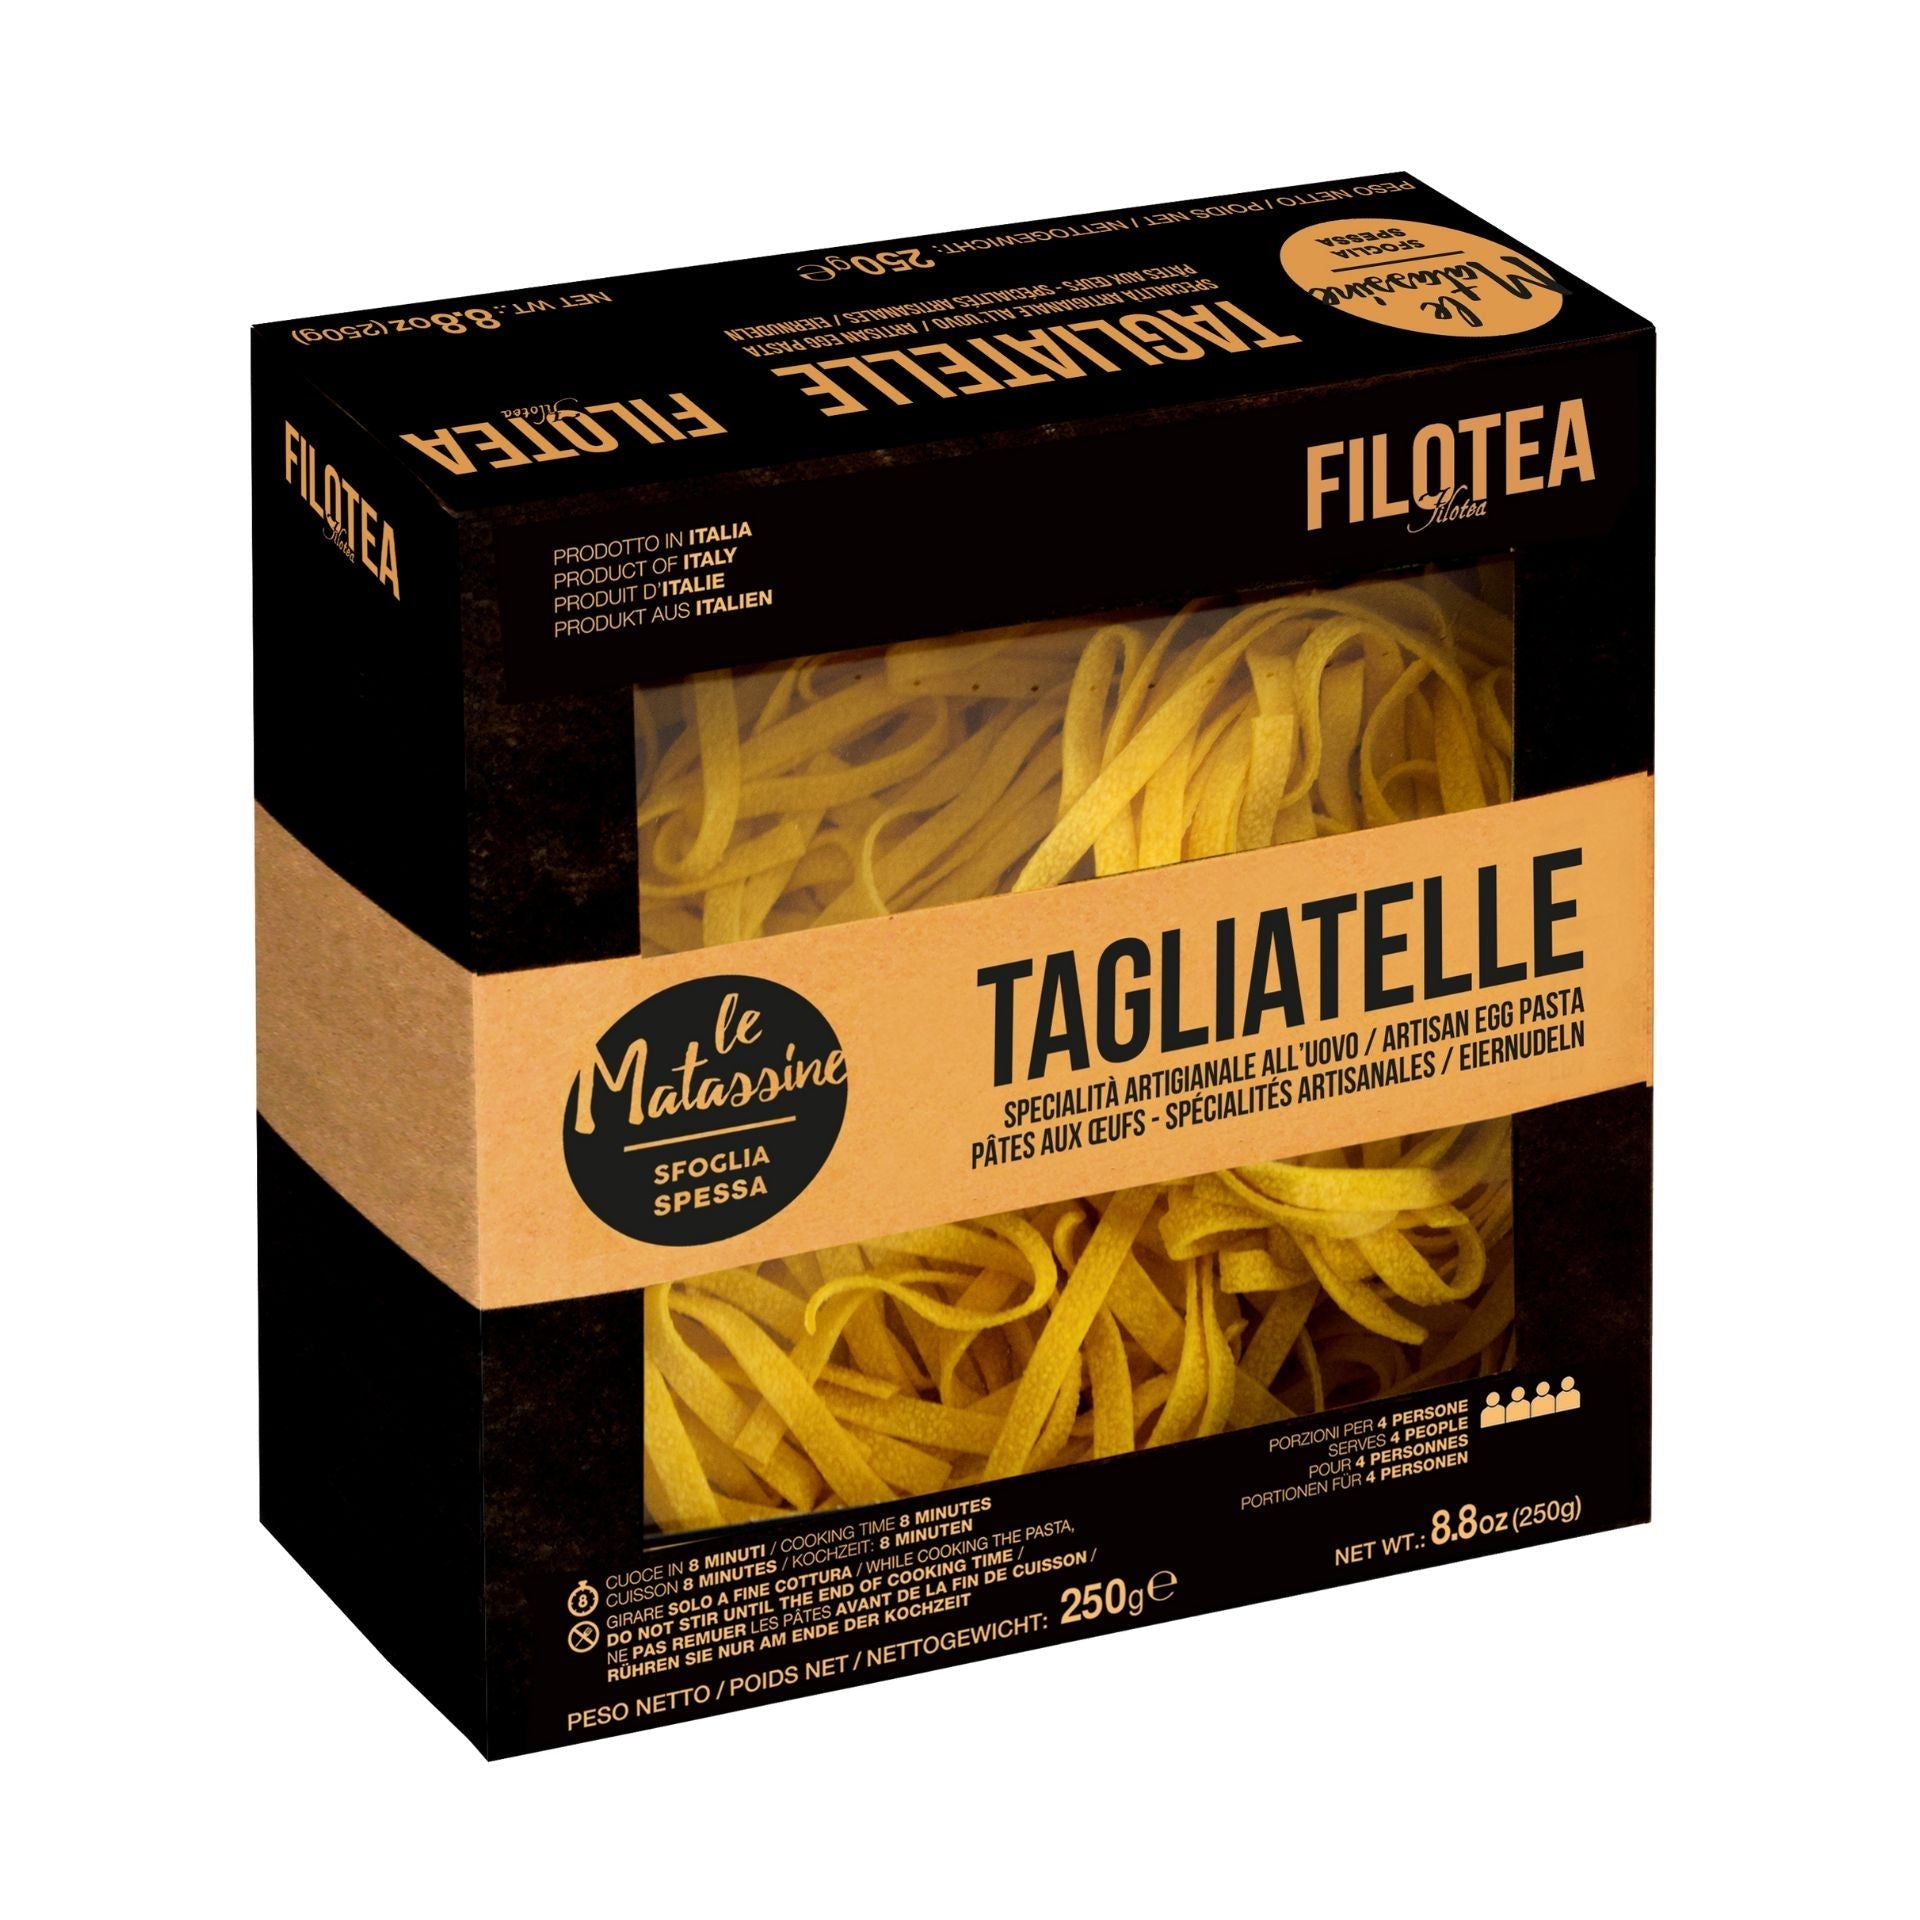 Filotea Le Matassine Tagliatelle Nest Artisan Egg Pasta 250g  | Imported and distributed in the UK by Just Gourmet Foods